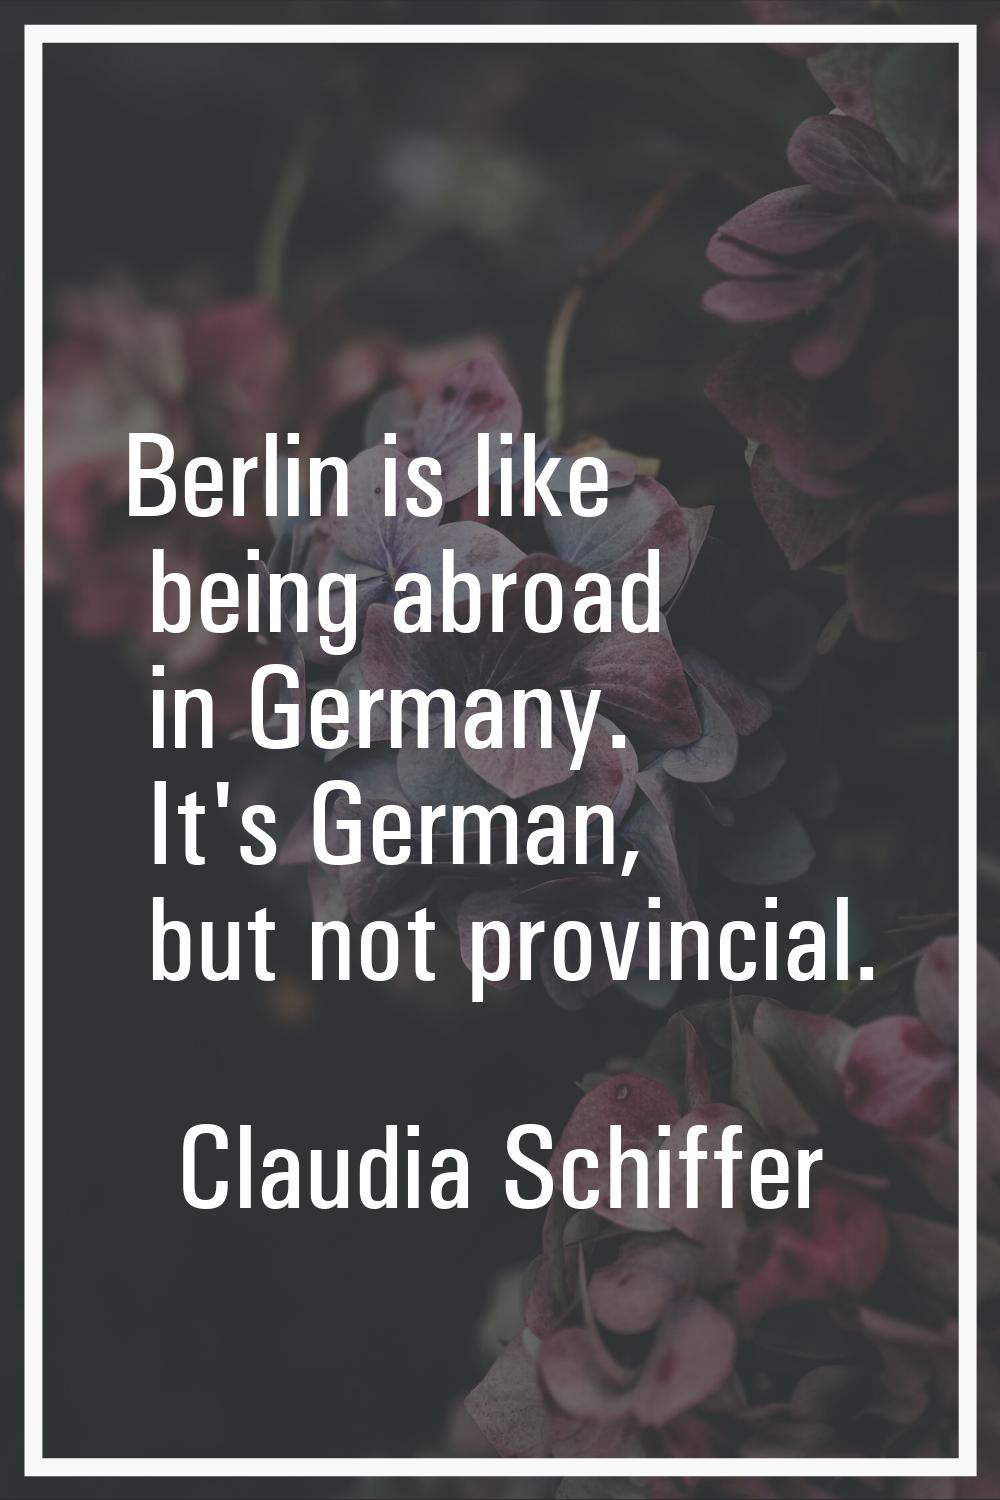 Berlin is like being abroad in Germany. It's German, but not provincial.